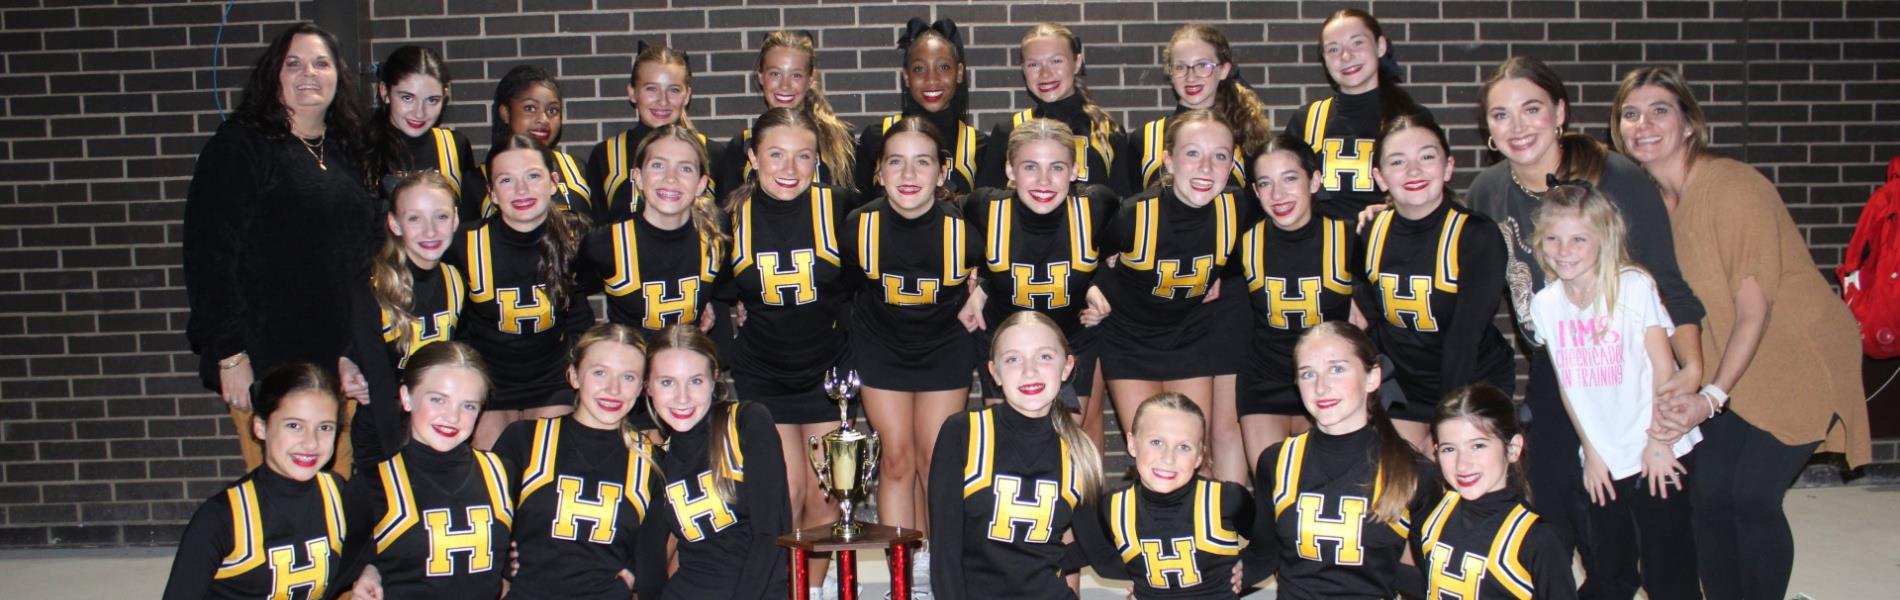 HMS Cheer Champs